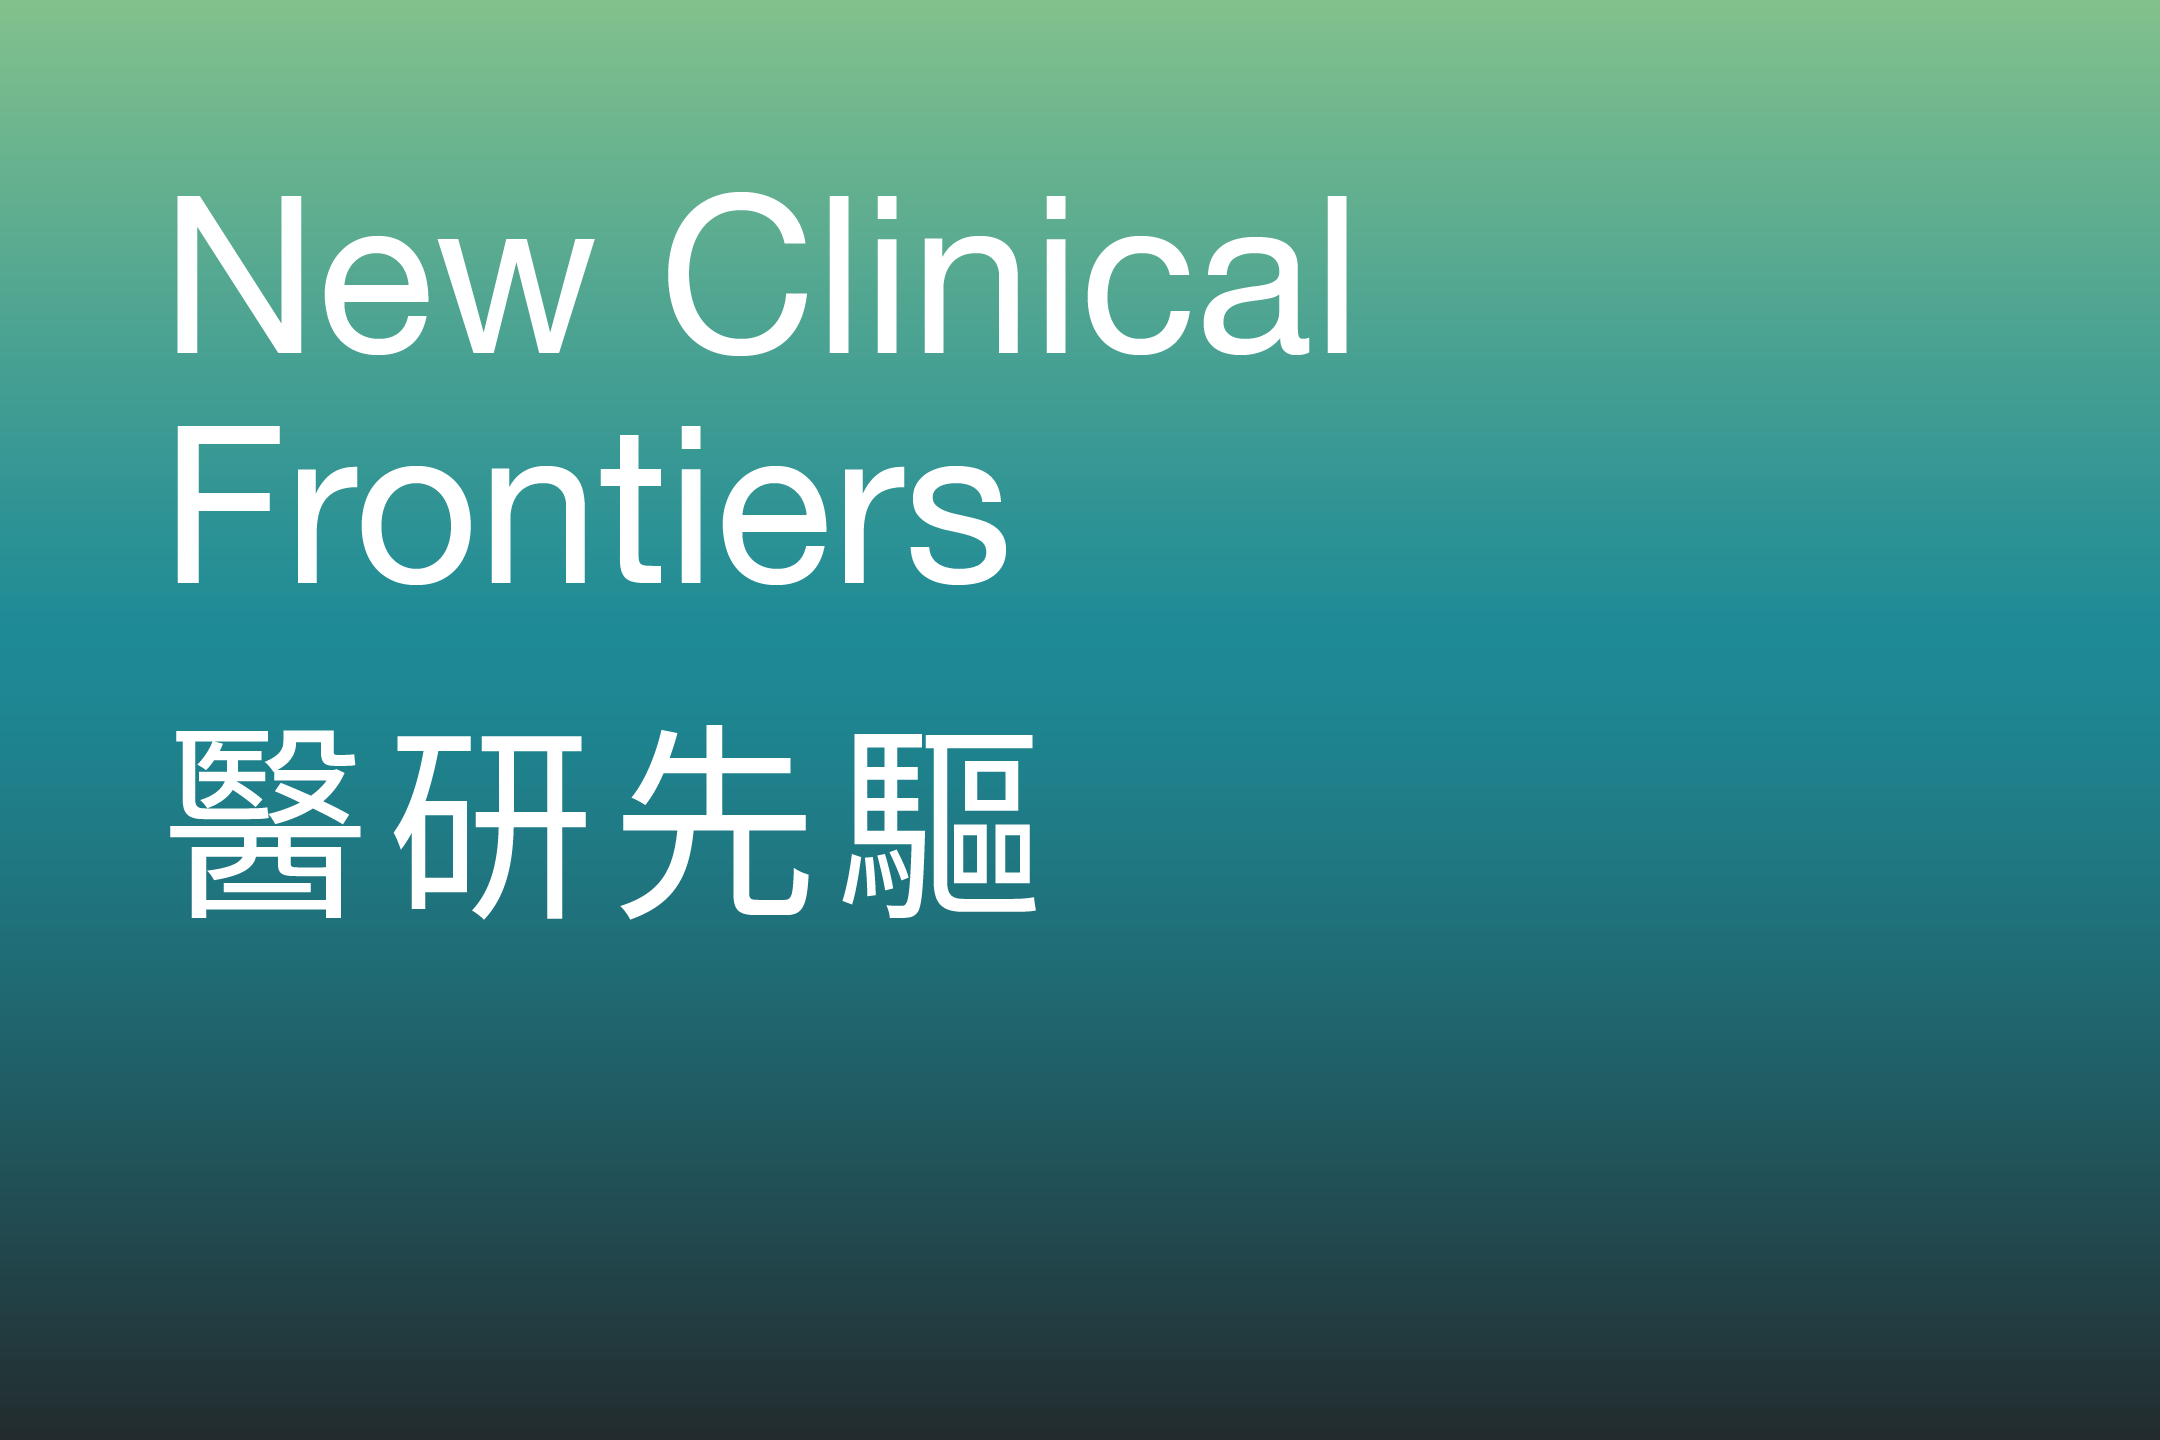 New Clinical Frontiers 醫研先驅